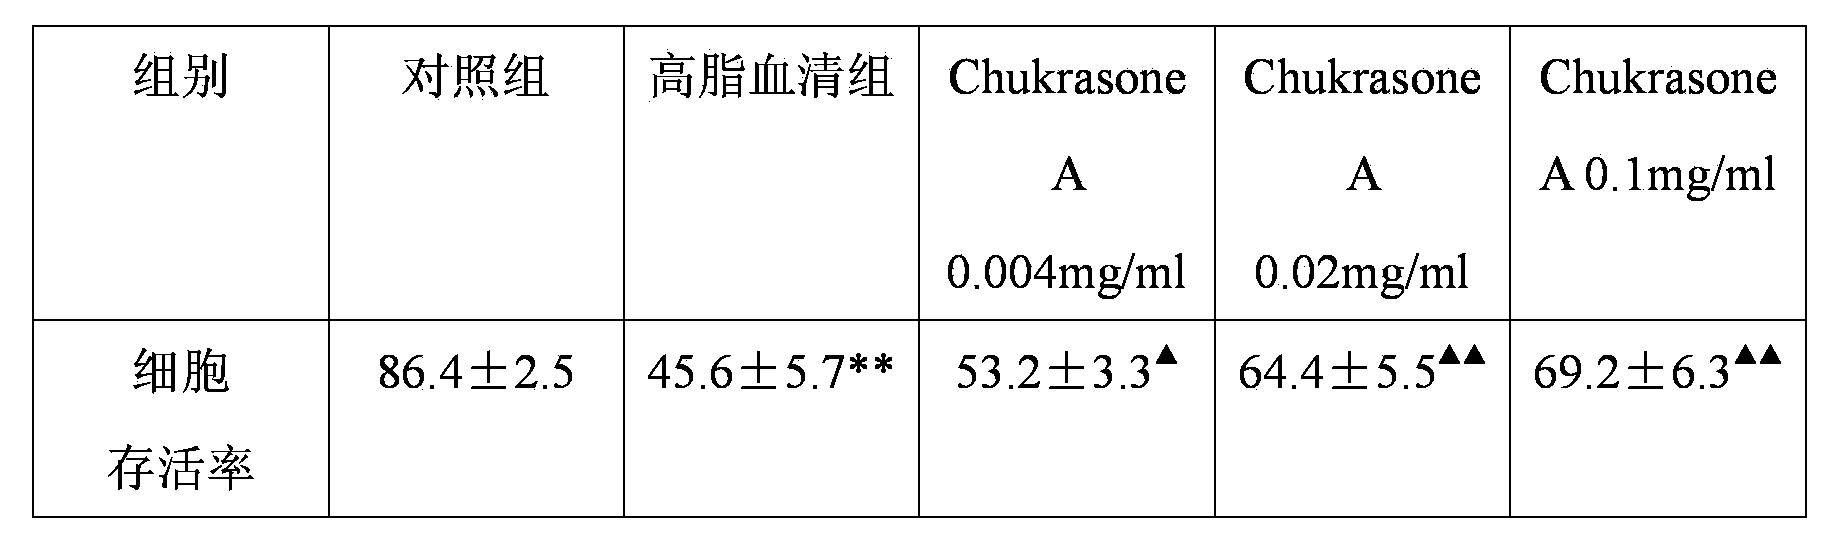 Application of Chukrasone A in preparation of medicines for treating atherosclerosis